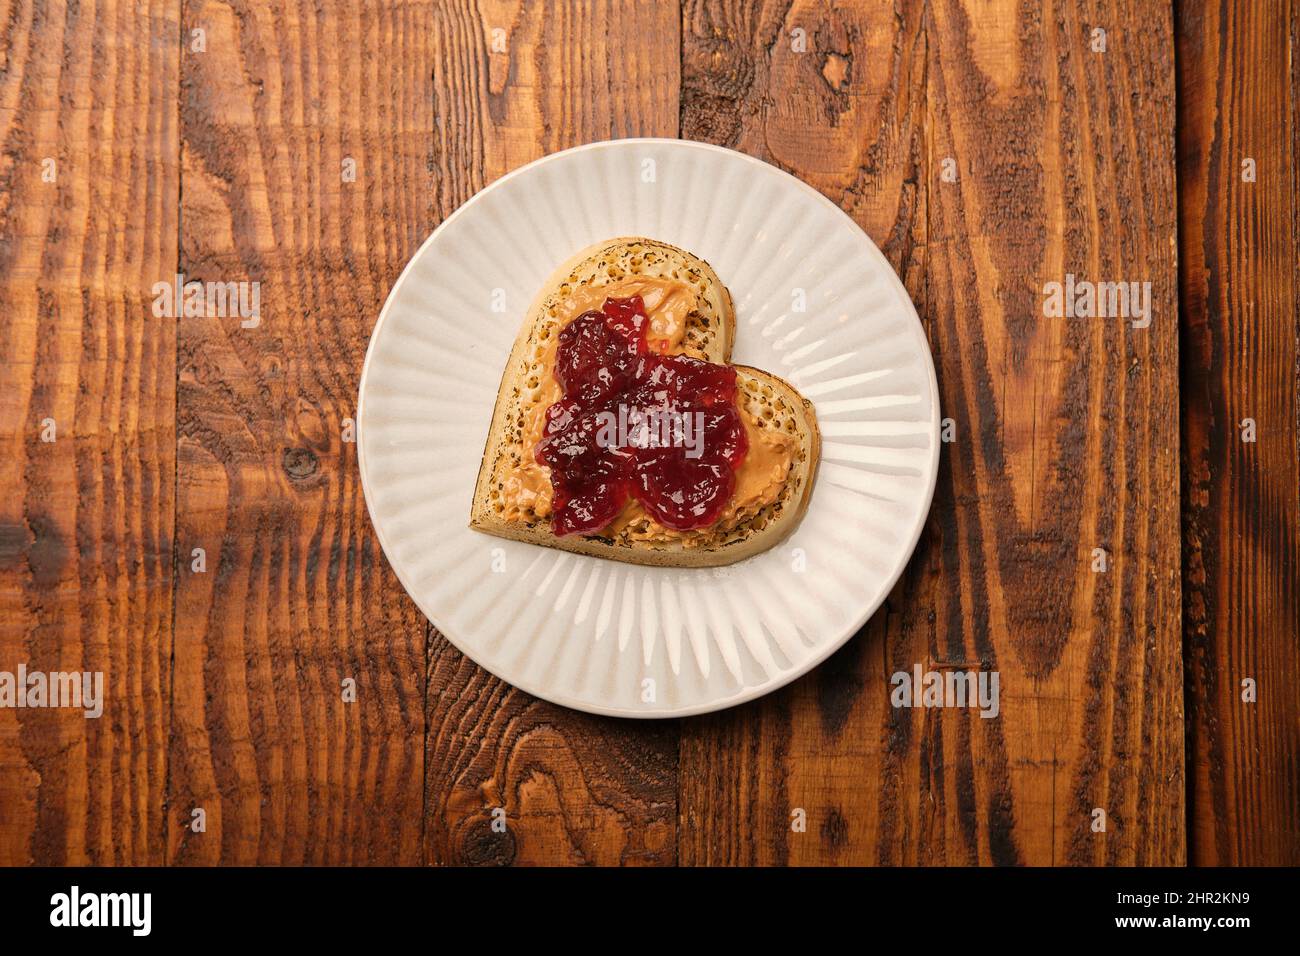 A valentines heart shaped crumpet with peanut butter and jelly jam. Stock Photo